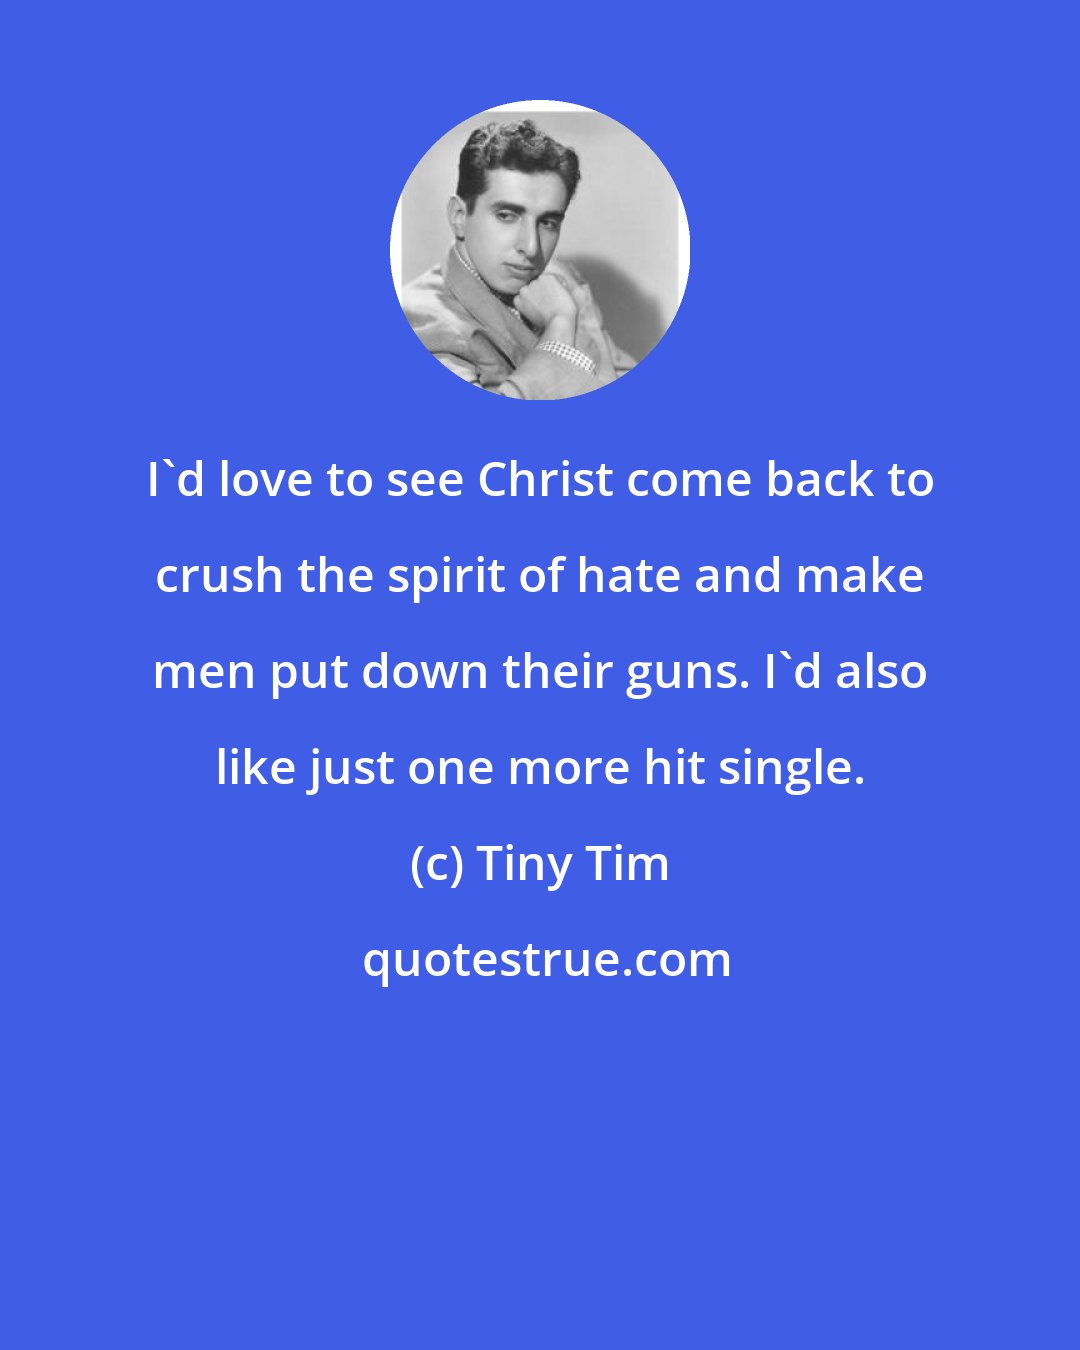 Tiny Tim: I'd love to see Christ come back to crush the spirit of hate and make men put down their guns. I'd also like just one more hit single.